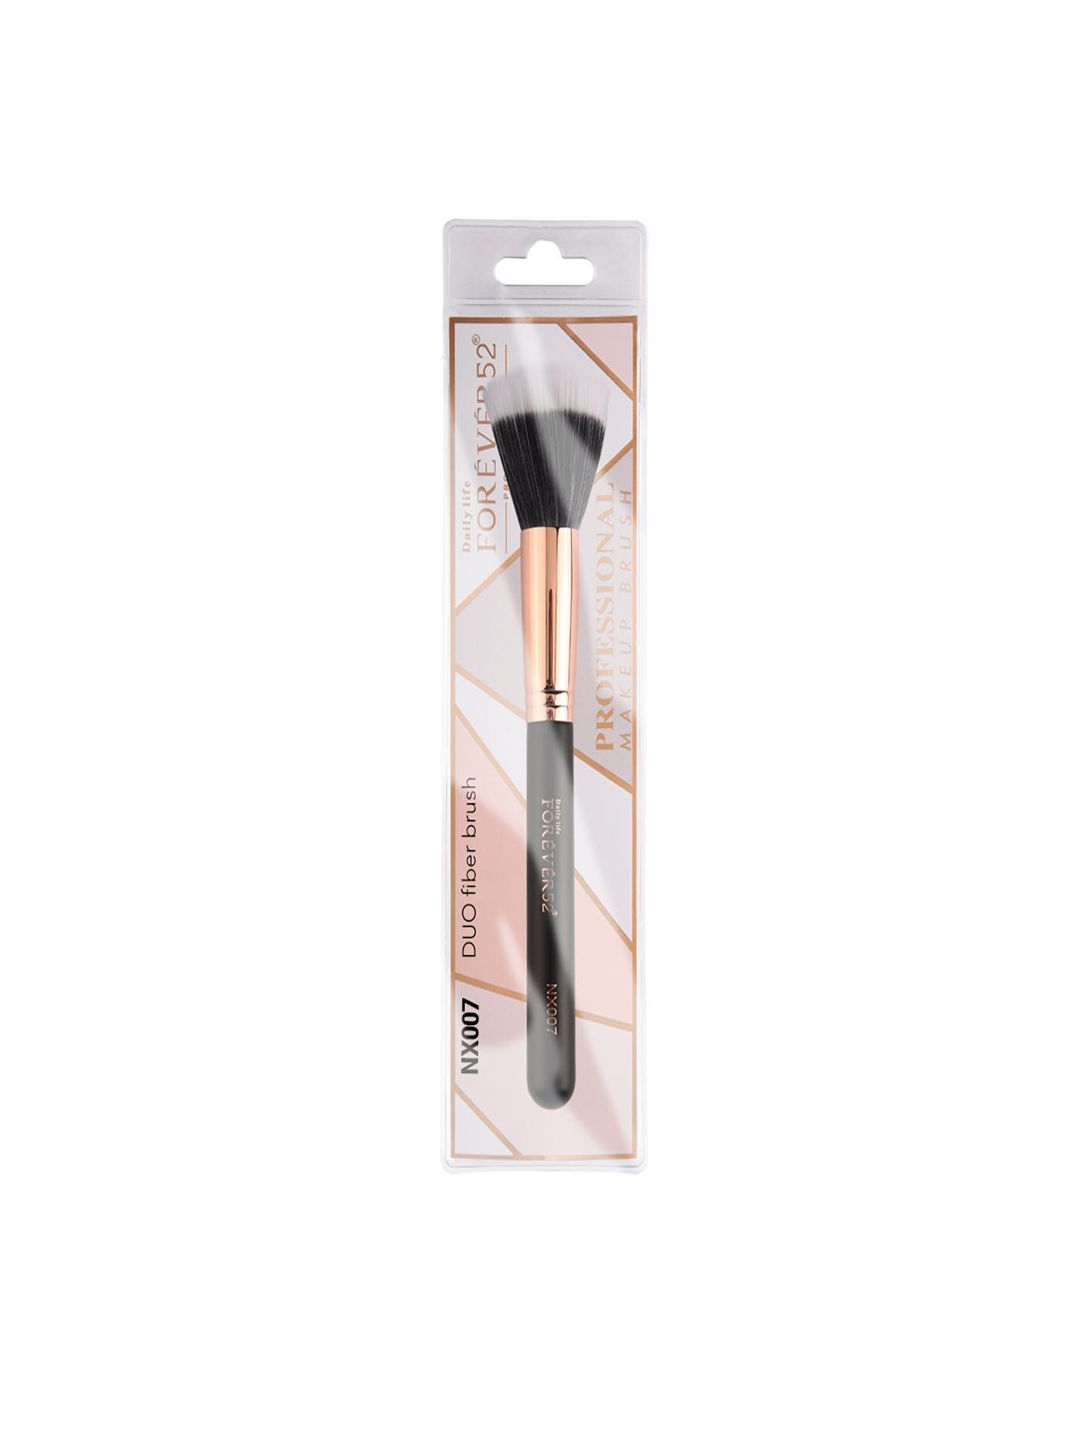 Daily Life Forever52 Duo fiber brush NX007 Price in India